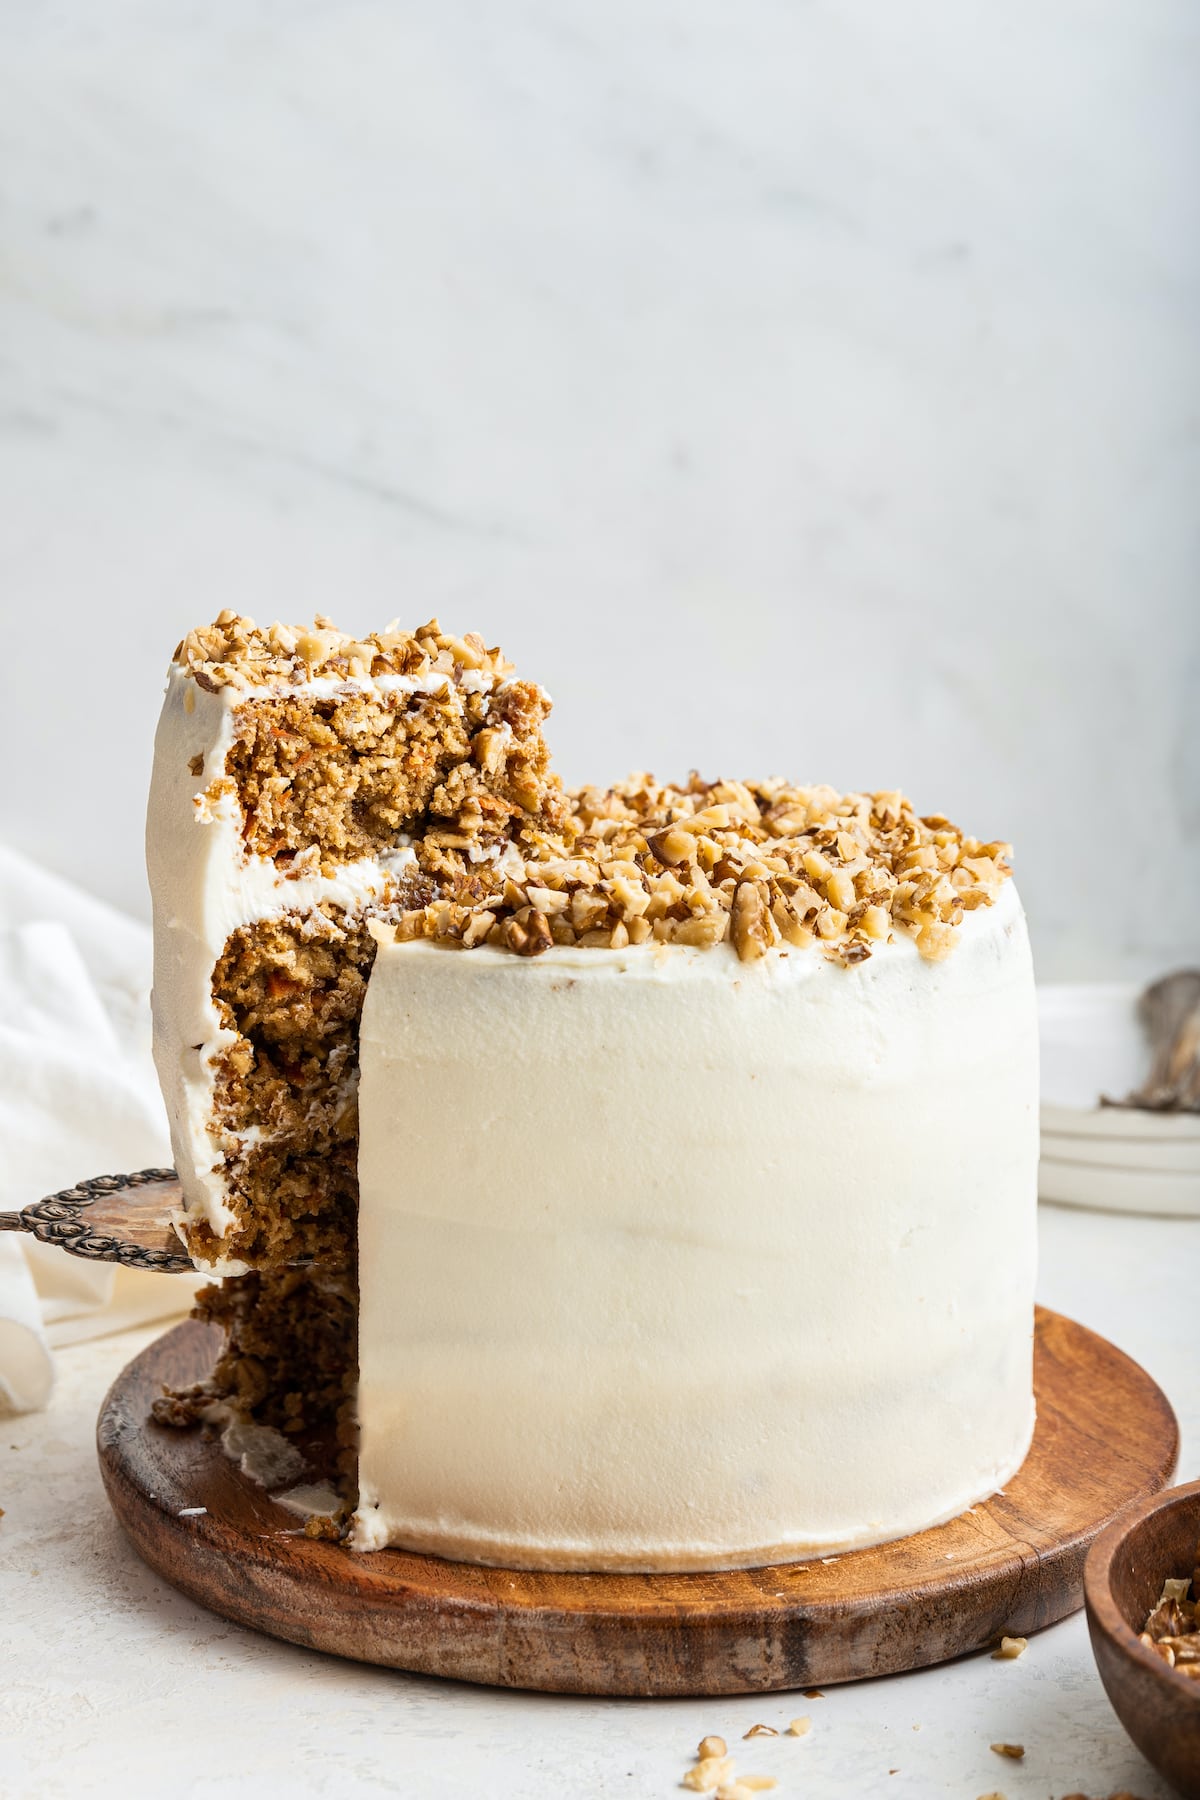 Oatmeal carrot cake on a wooden board with a slice being removed from it. The cake is frosted in a cream cheese frosting and has chopped walnuts on top.